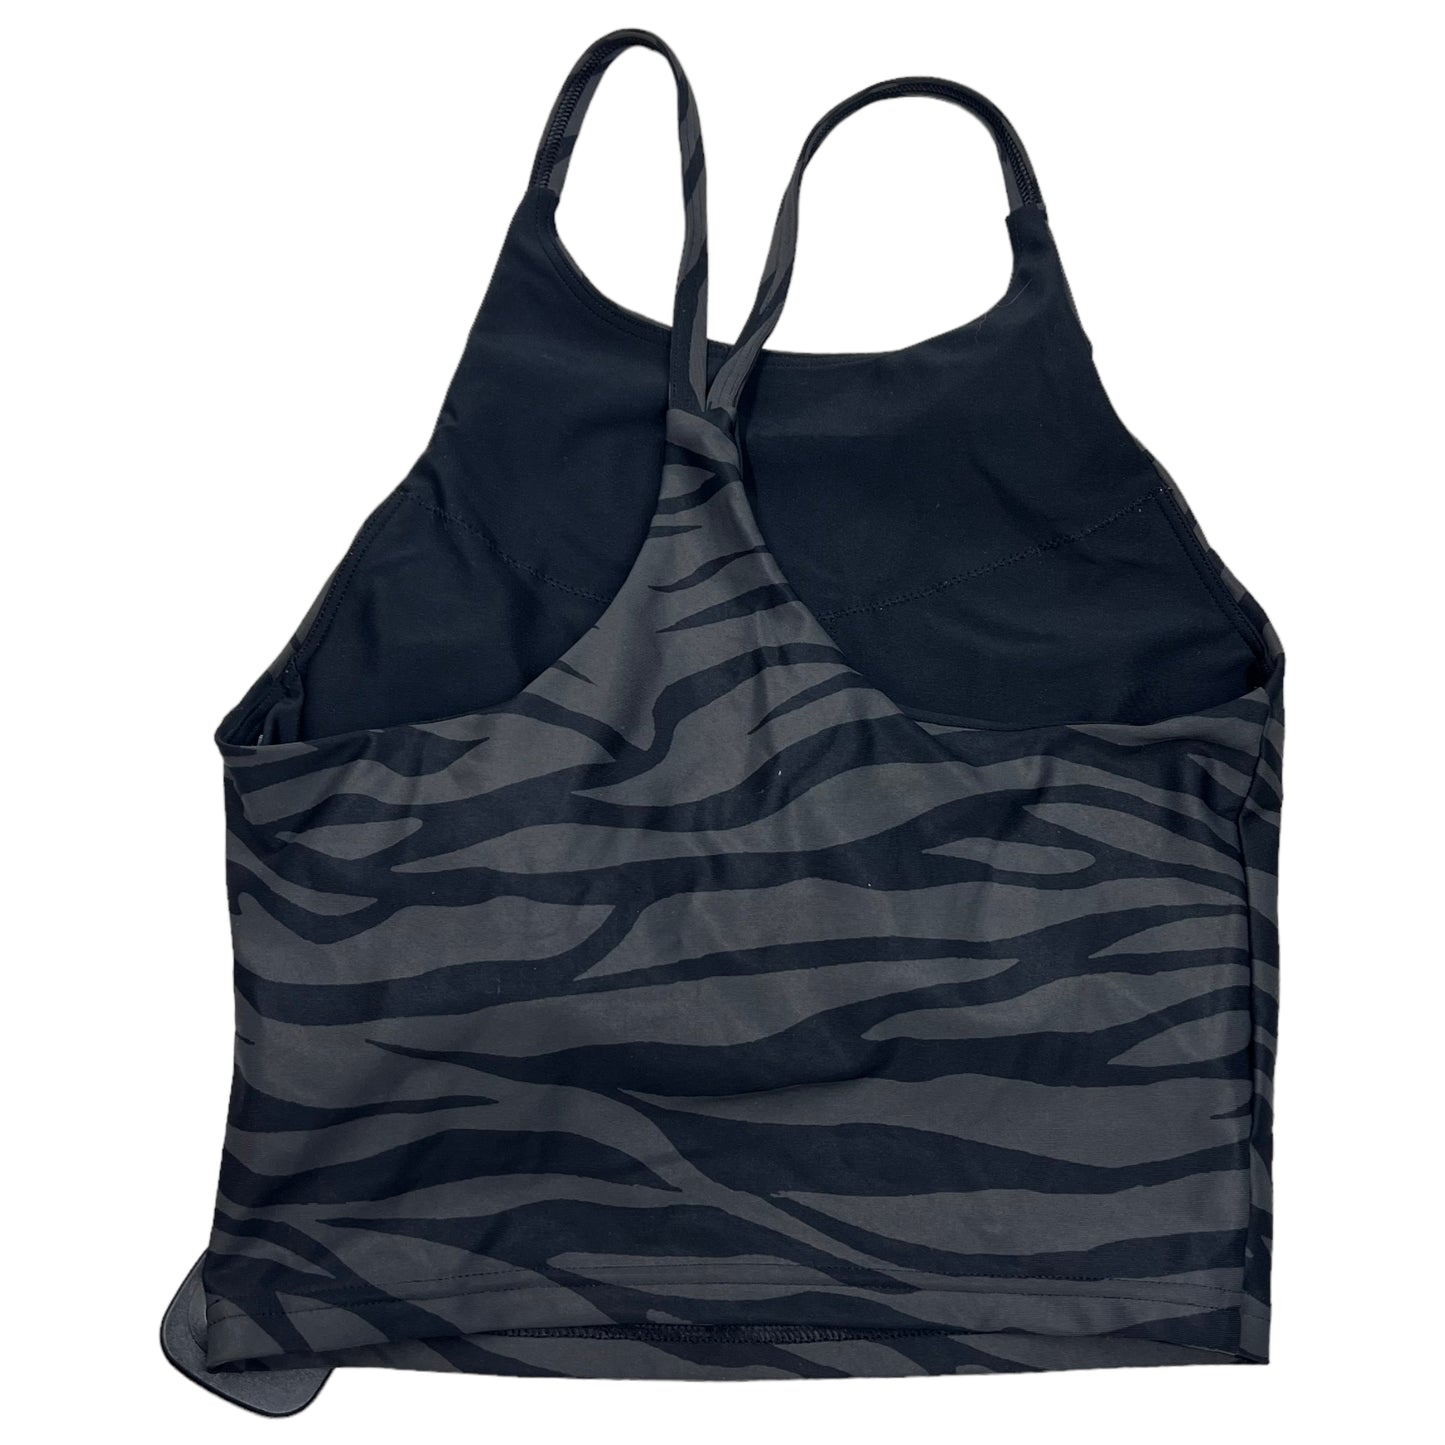 Athletic Bra By Old Navy